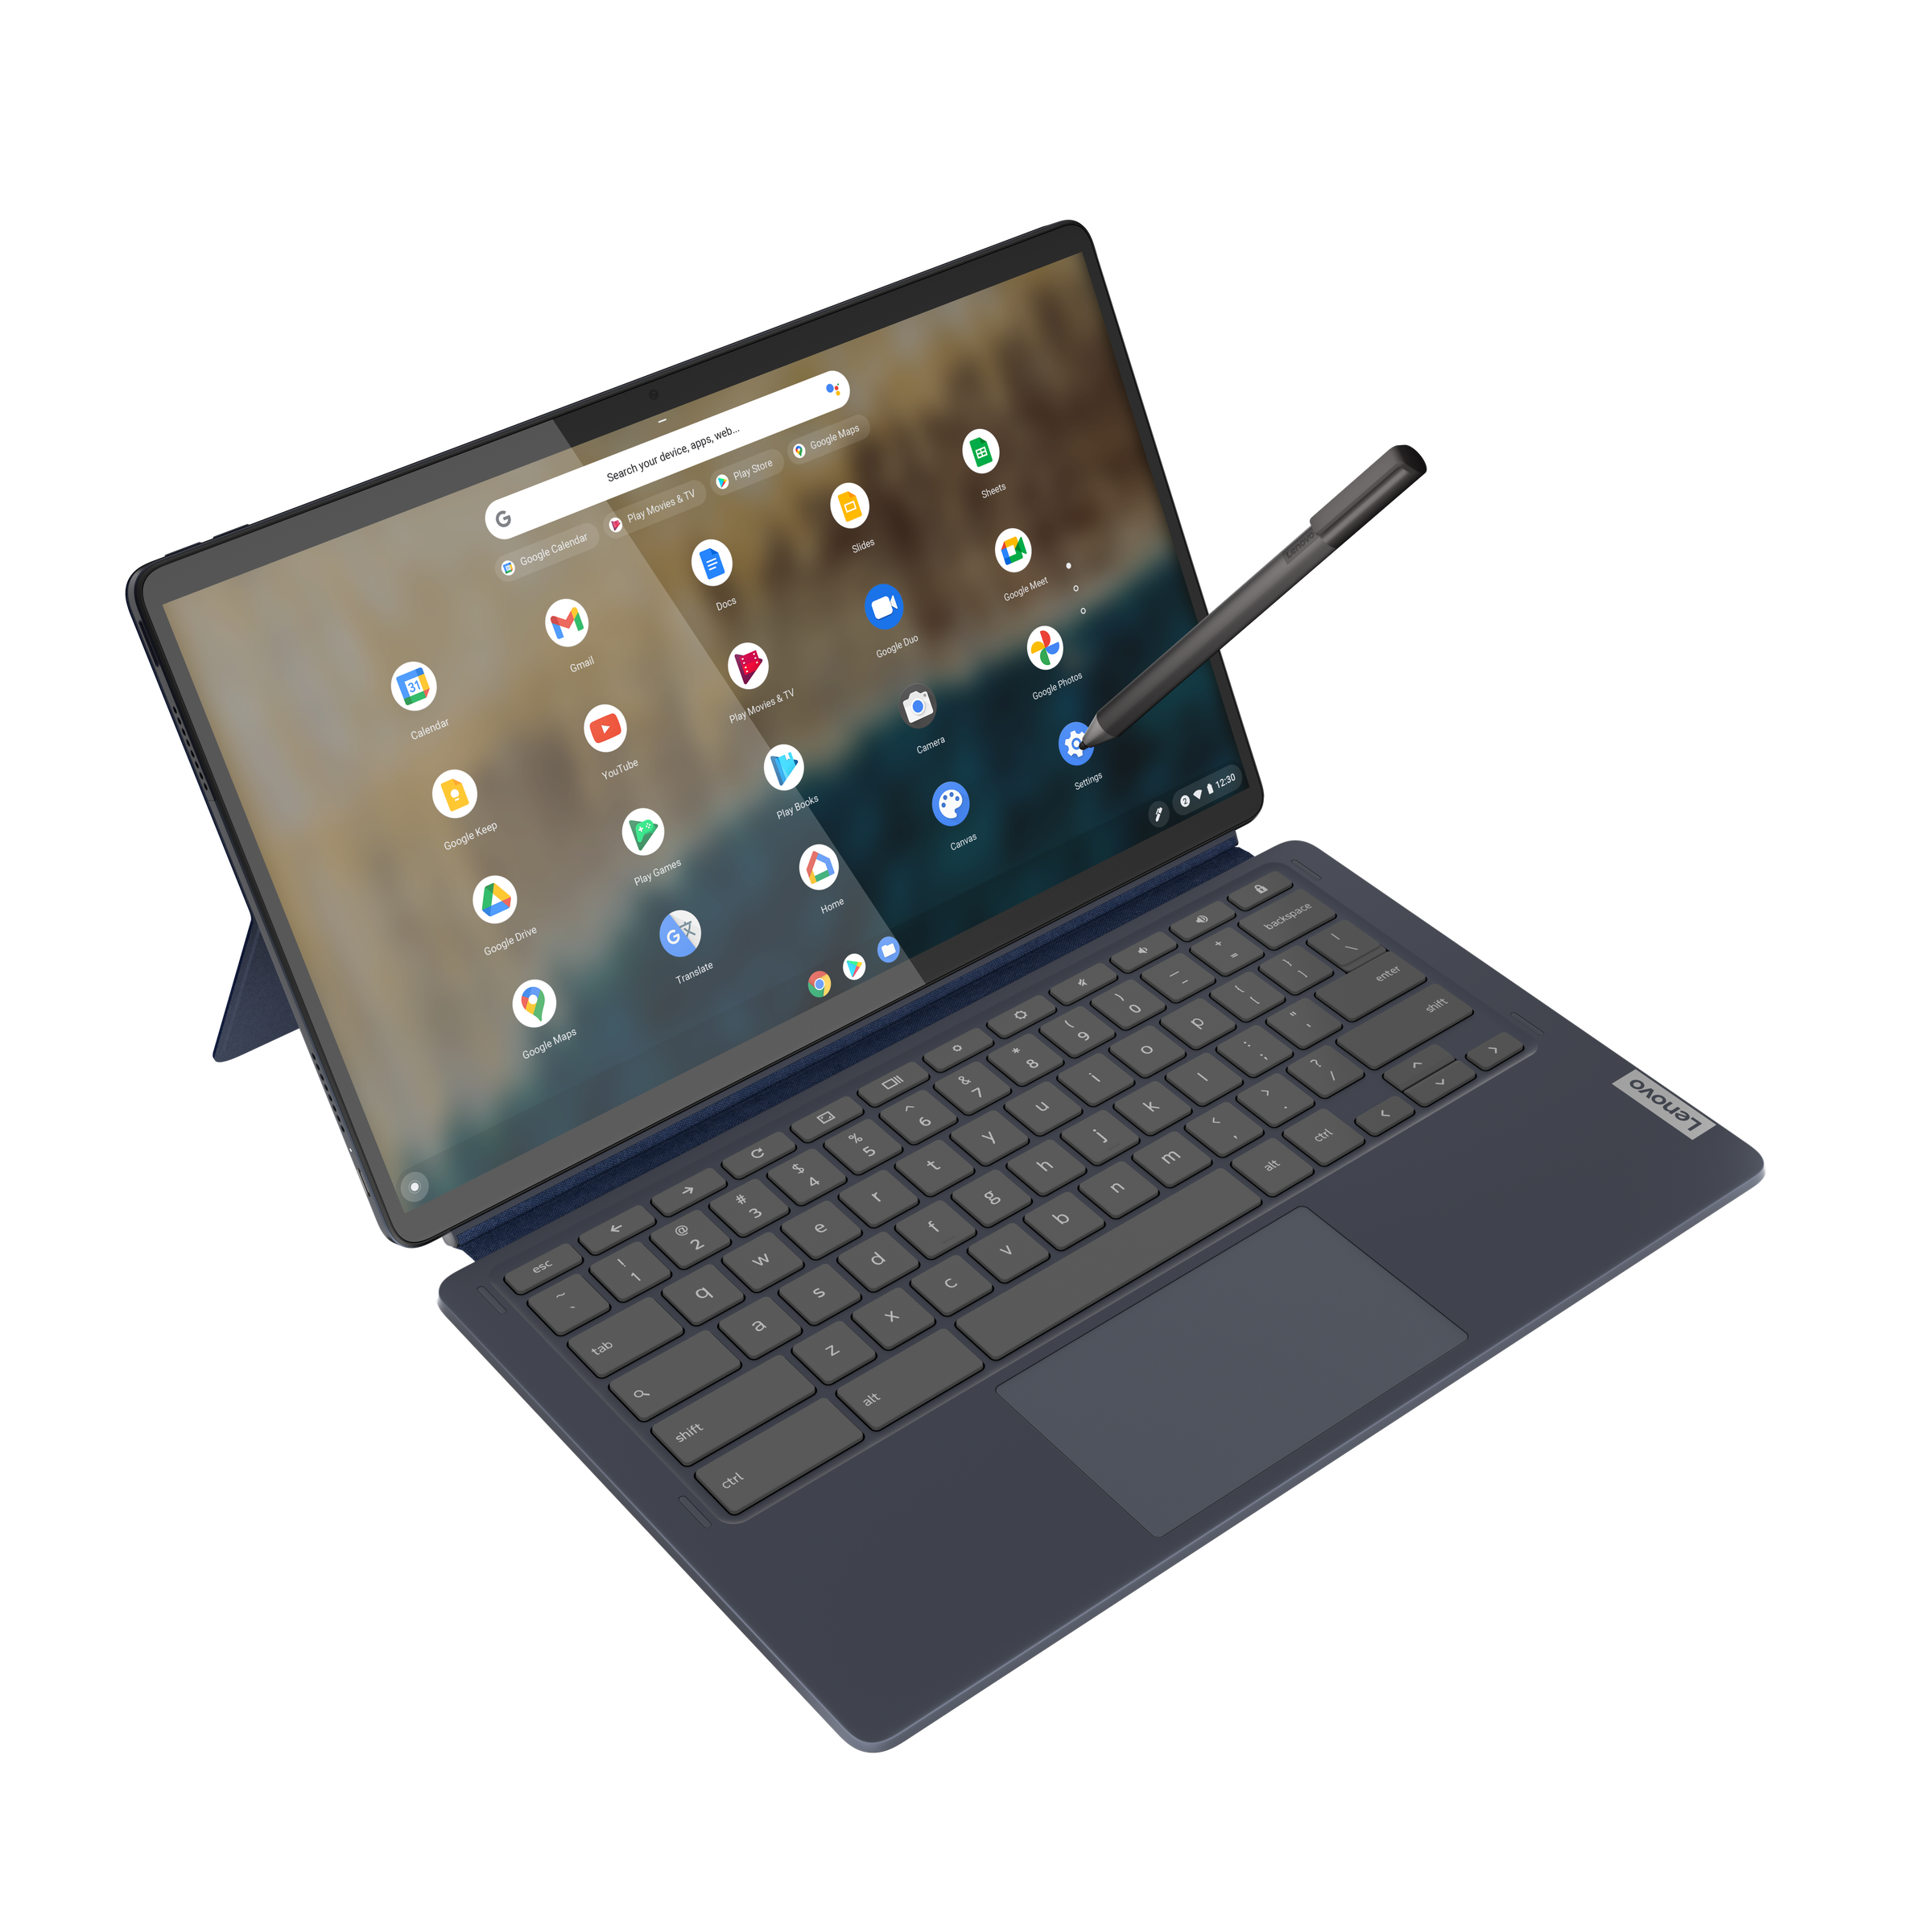 The Lenovo Chromebook Duet in laptop mode, seen from above on a white background with the stylus perpendicular to the right side of the panel. The screen displays the Chrome OS launcher.